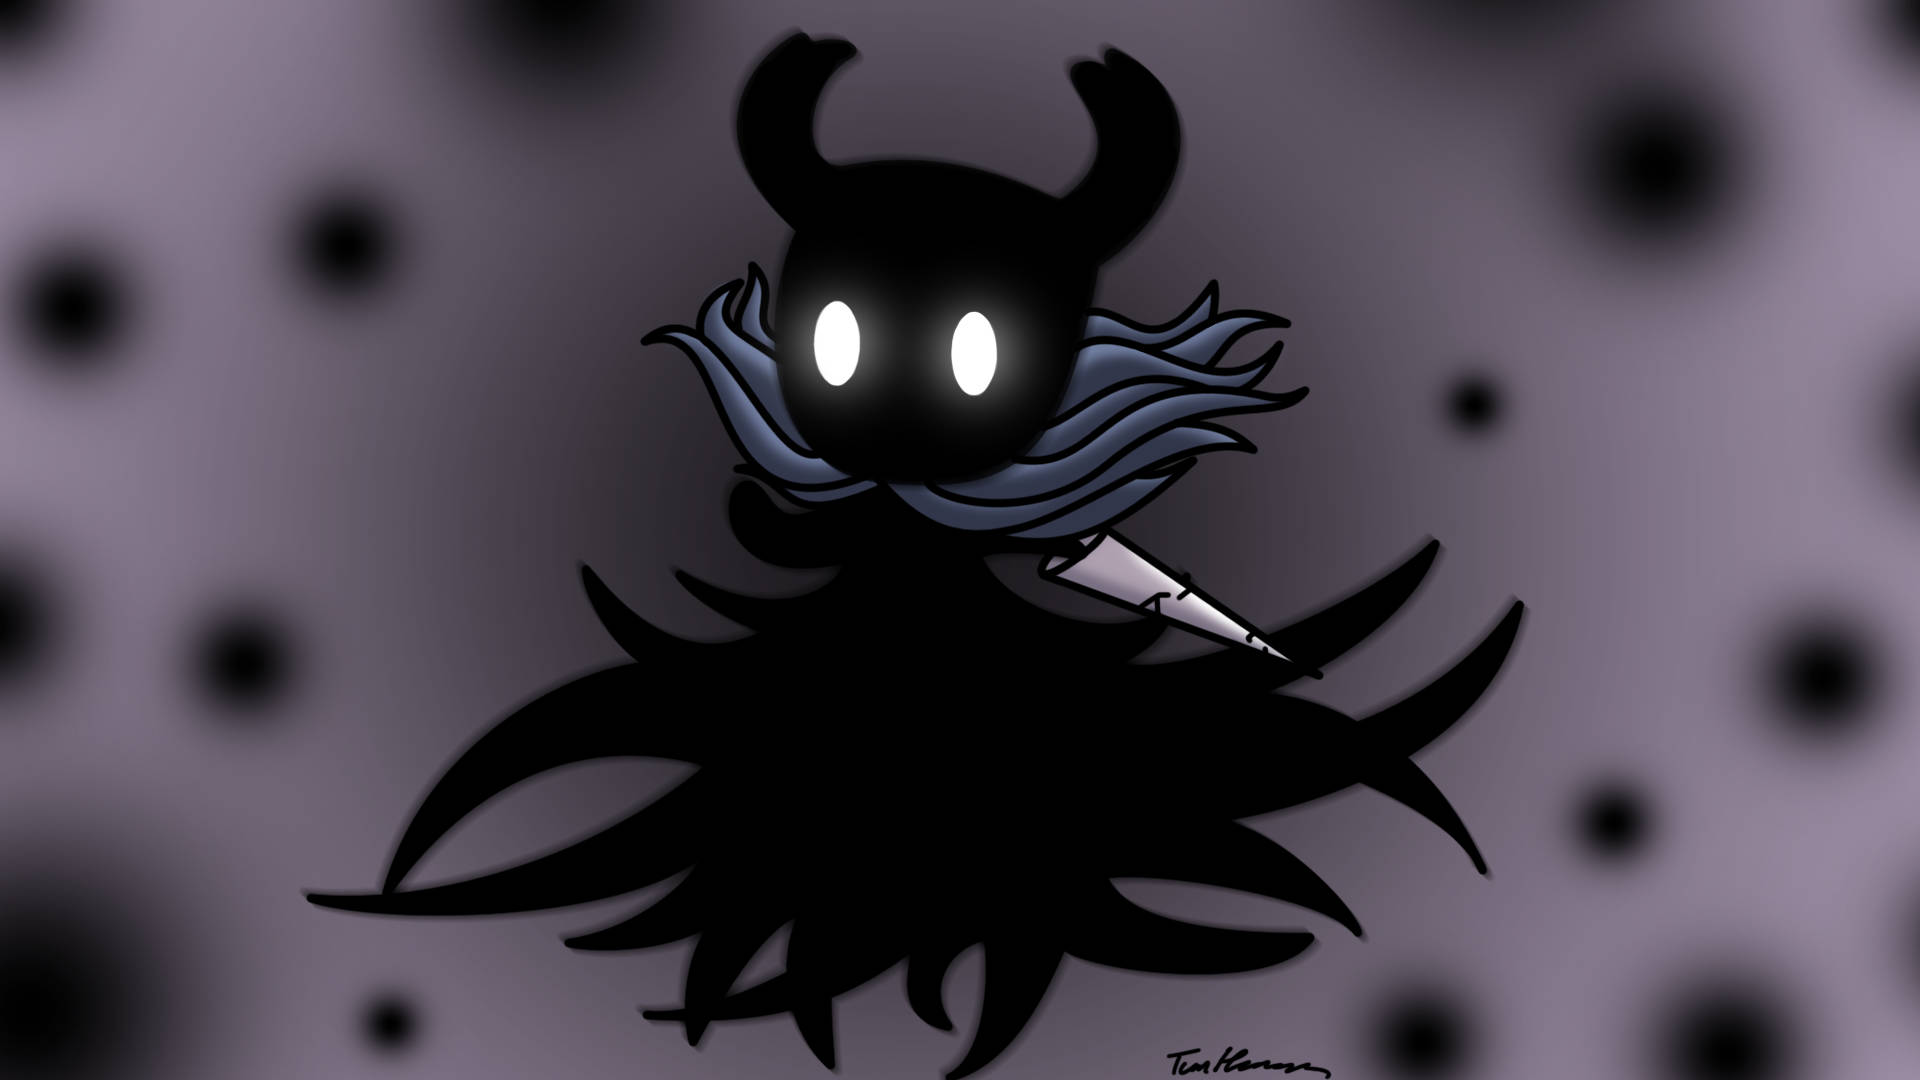 Prepare to take control of your fate in Hollow Knight! Wallpaper